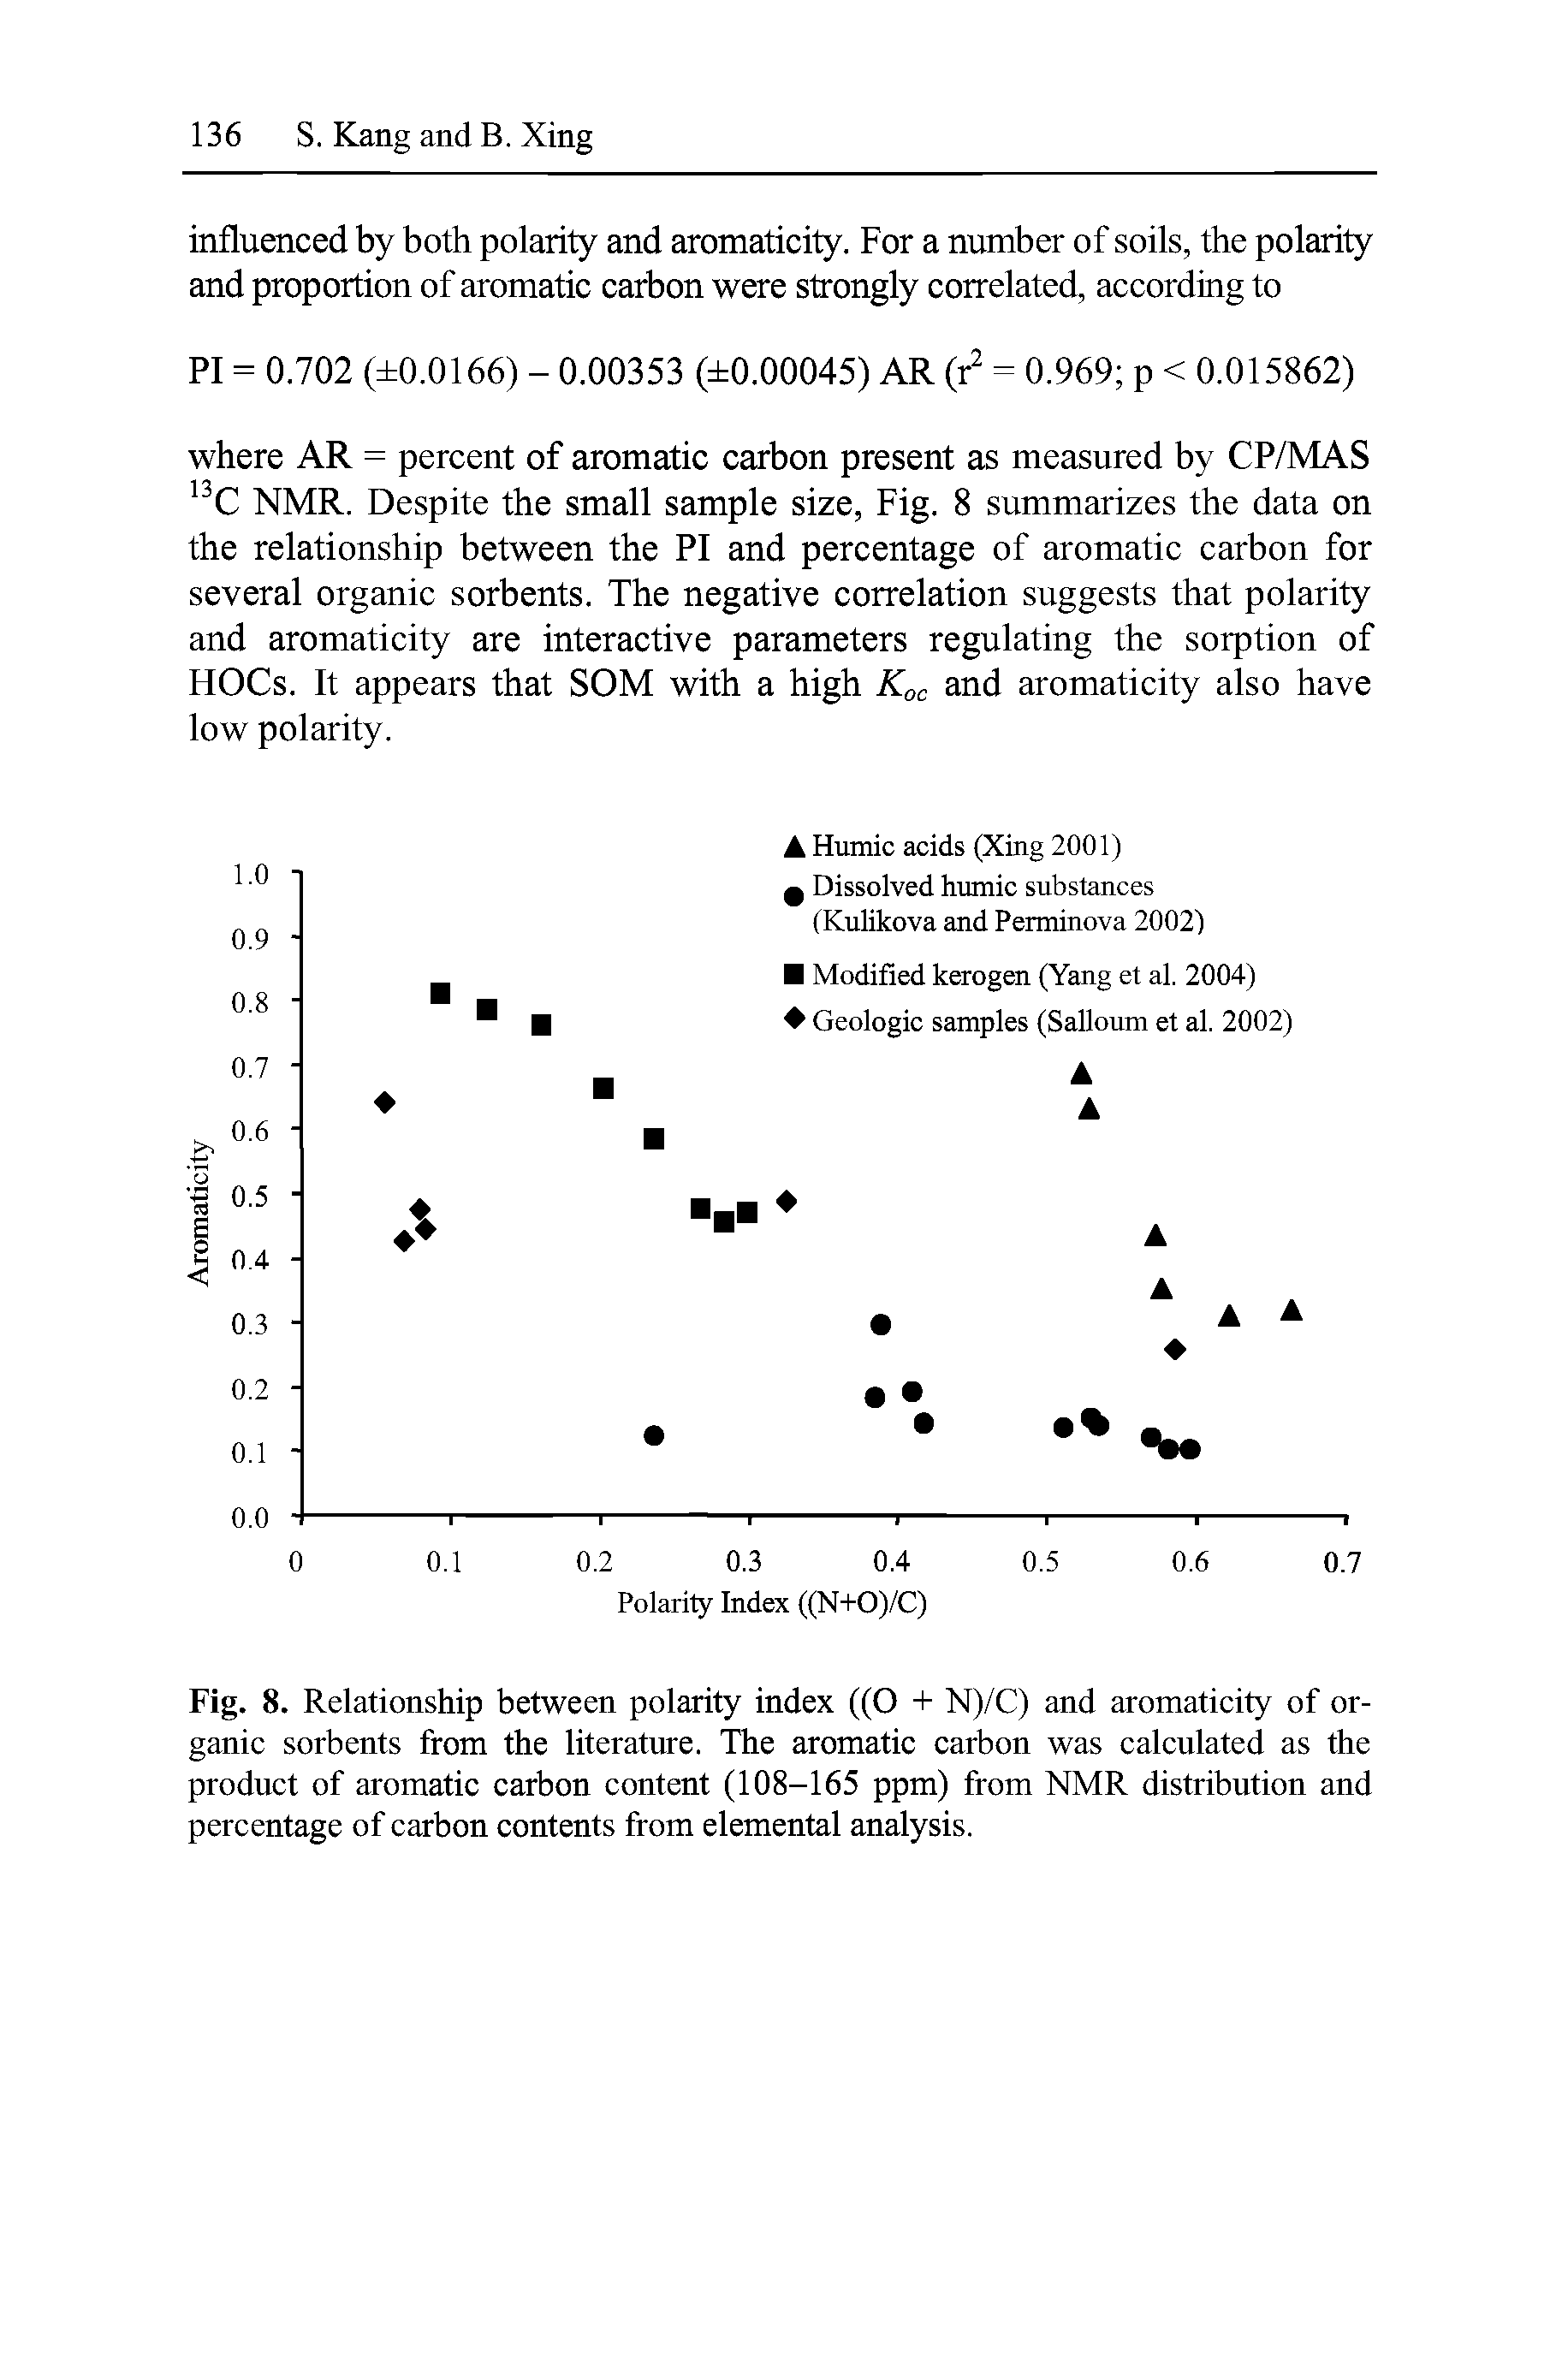 Fig. 8. Relationship between polarity index ((O + N)/C) and aromaticity of organic sorbents from the literature. The aromatic carbon was calculated as the product of aromatic carbon content (108-165 ppm) from NMR distribution and percentage of carbon contents from elemental analysis.